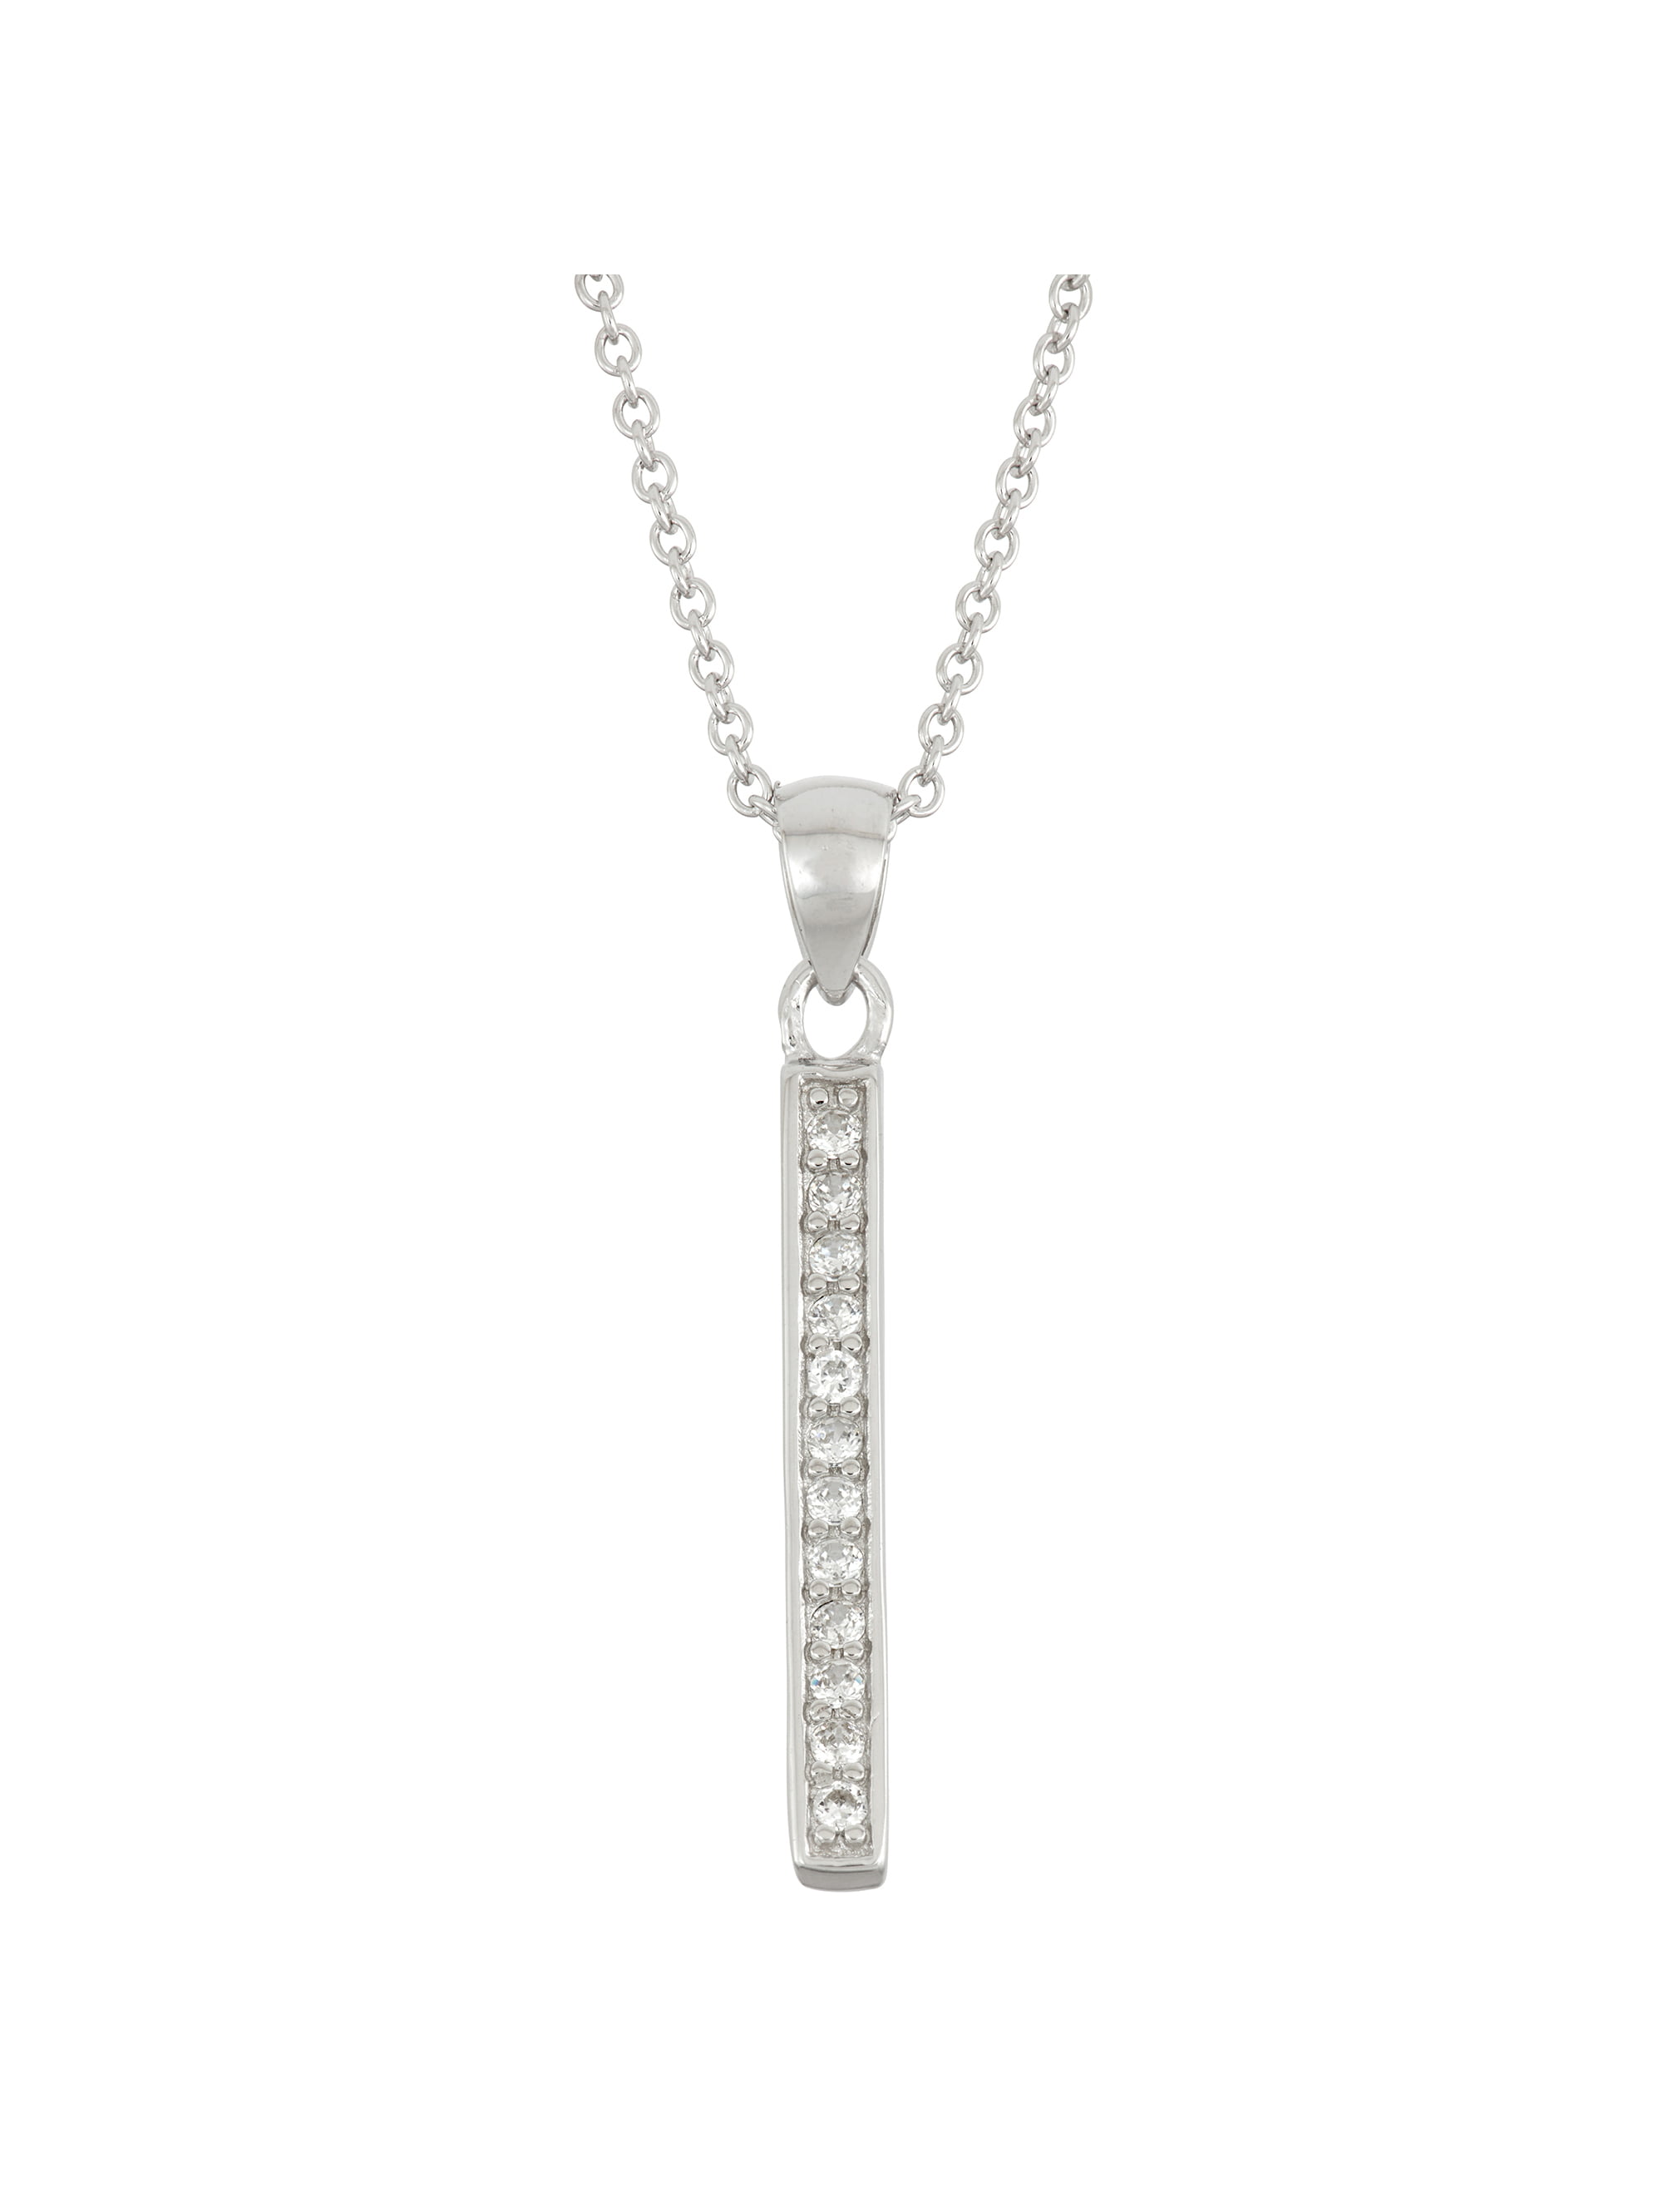 Vaccinated Personalize Solid Vertical Bar Pendant .925 Sterling Silver